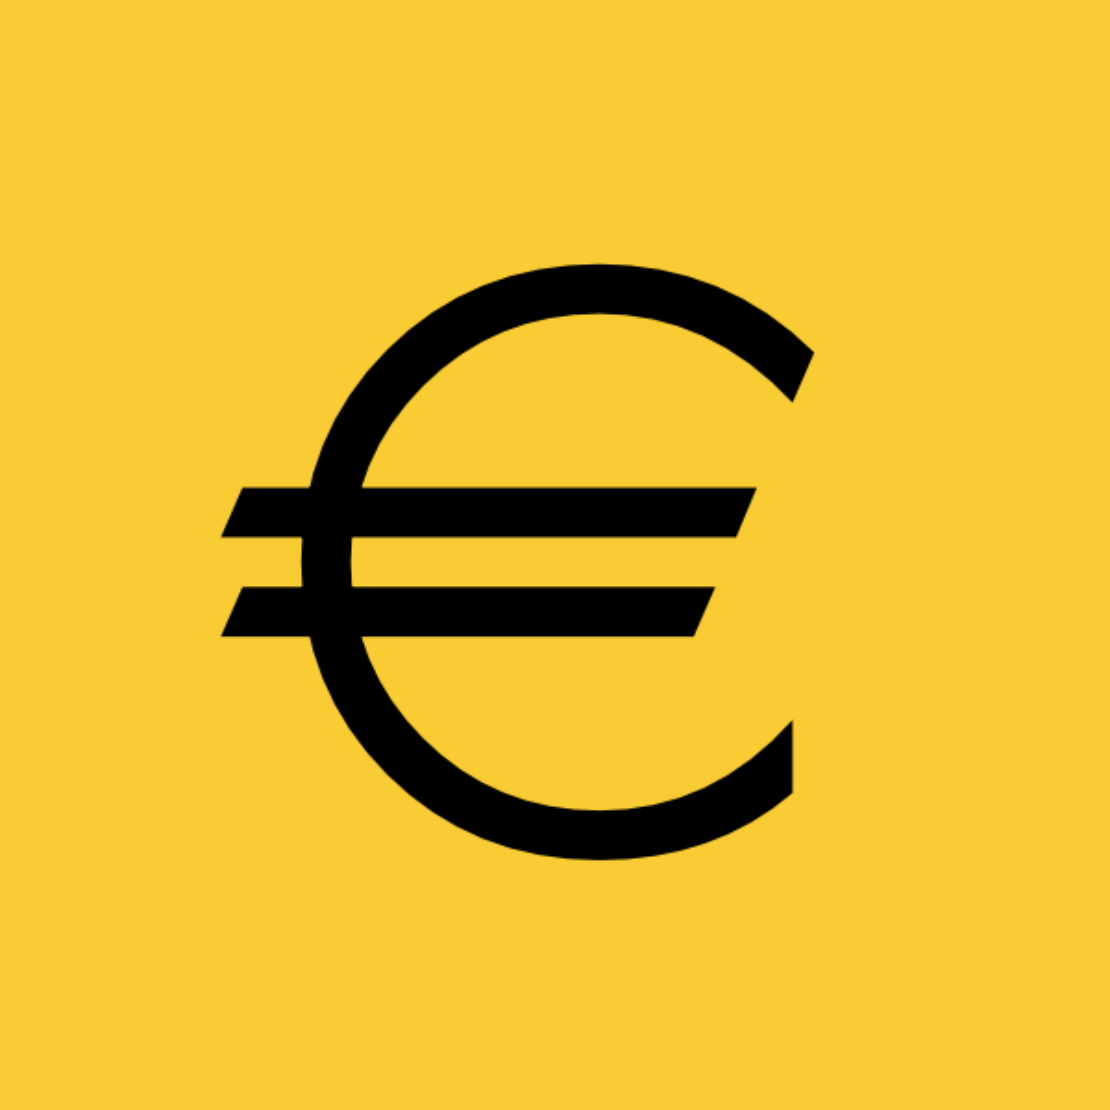 The Euro currency symbol